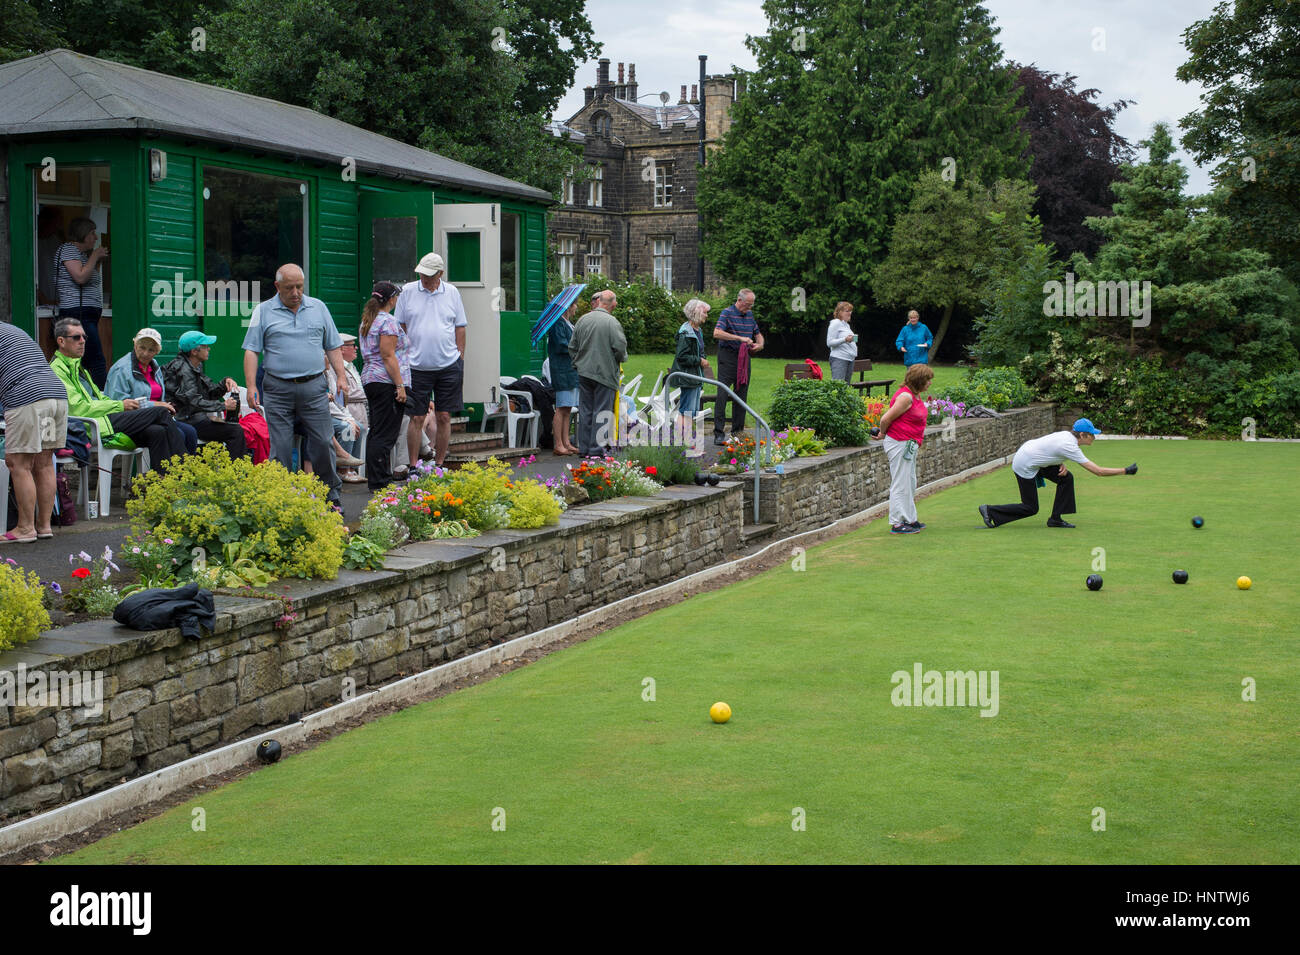 Competitors and spectators at a crown green bowling match on the bowling green in the village of Burley In Wharfedale, West Yorkshire, England. Stock Photo